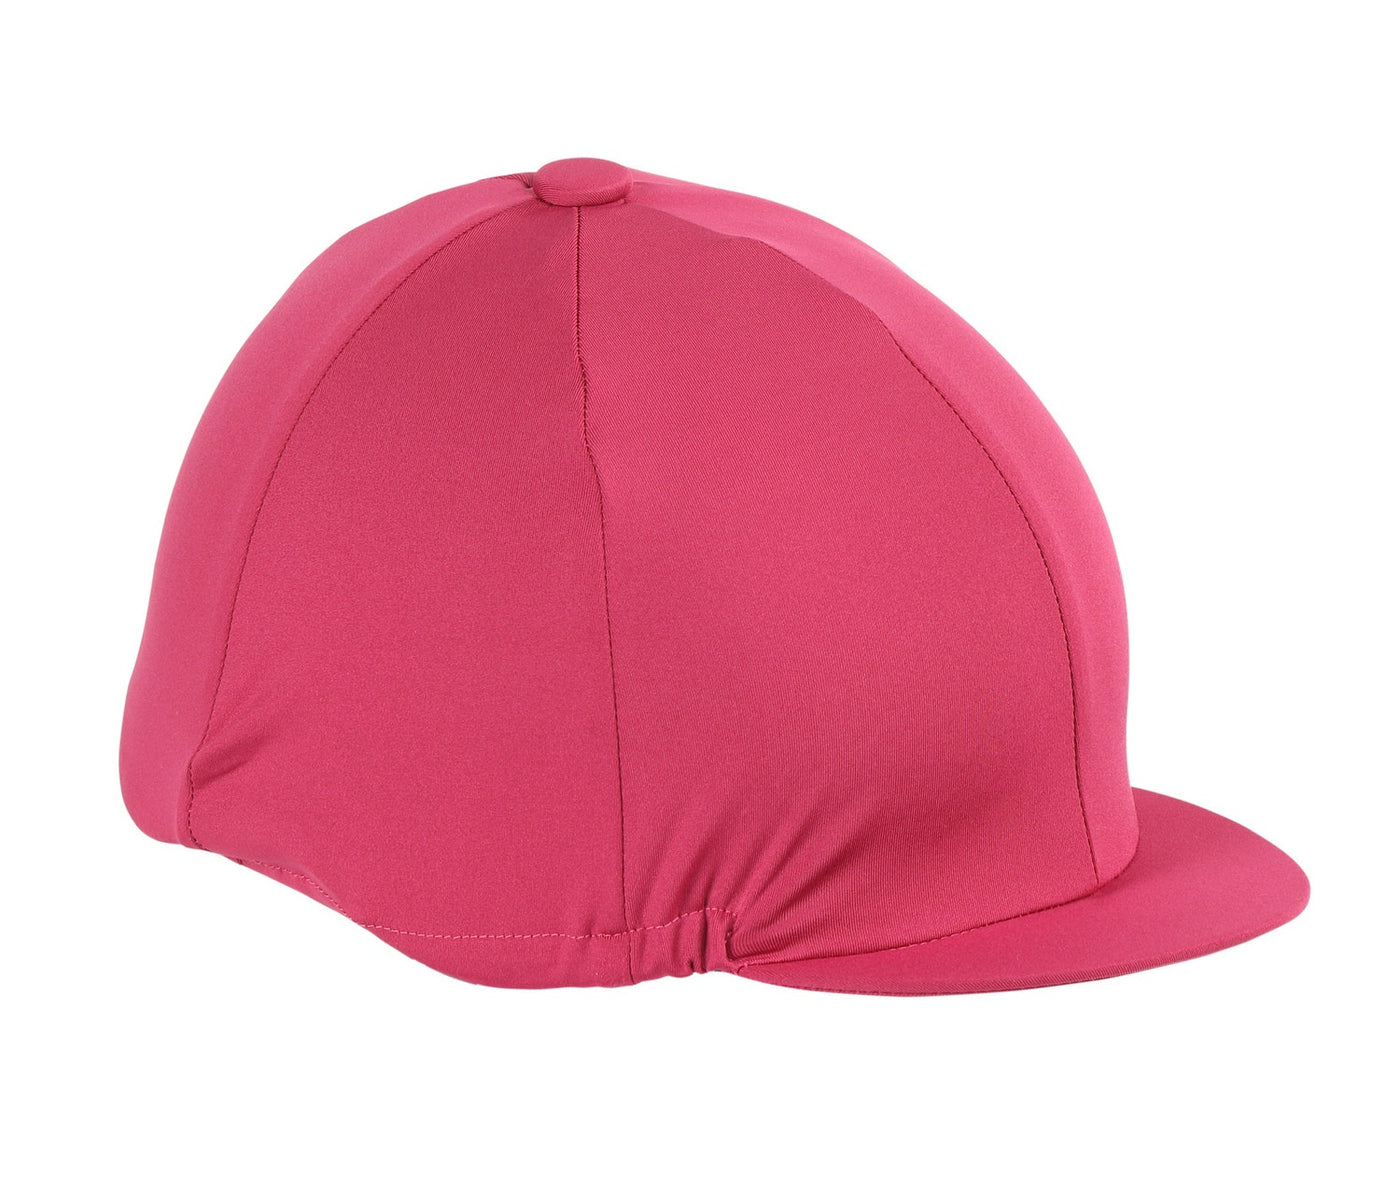 Shires Aubrion Hat Covers - Raspberry 851